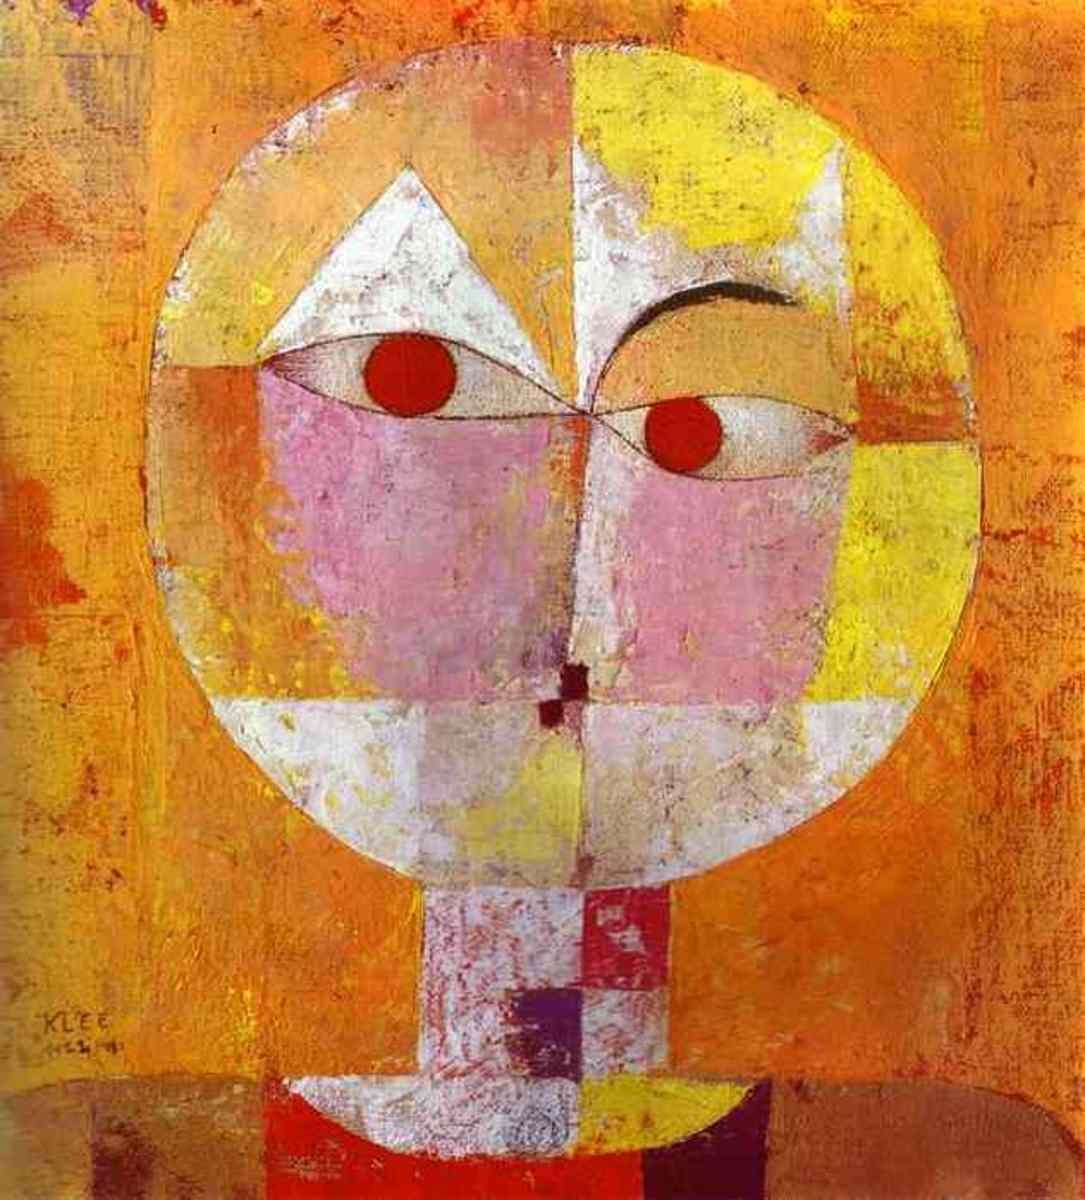 Paul Klee's abstract figure, Senecio (Head of a Man) (1922). Abstracts and figures are both types of art that sell well.